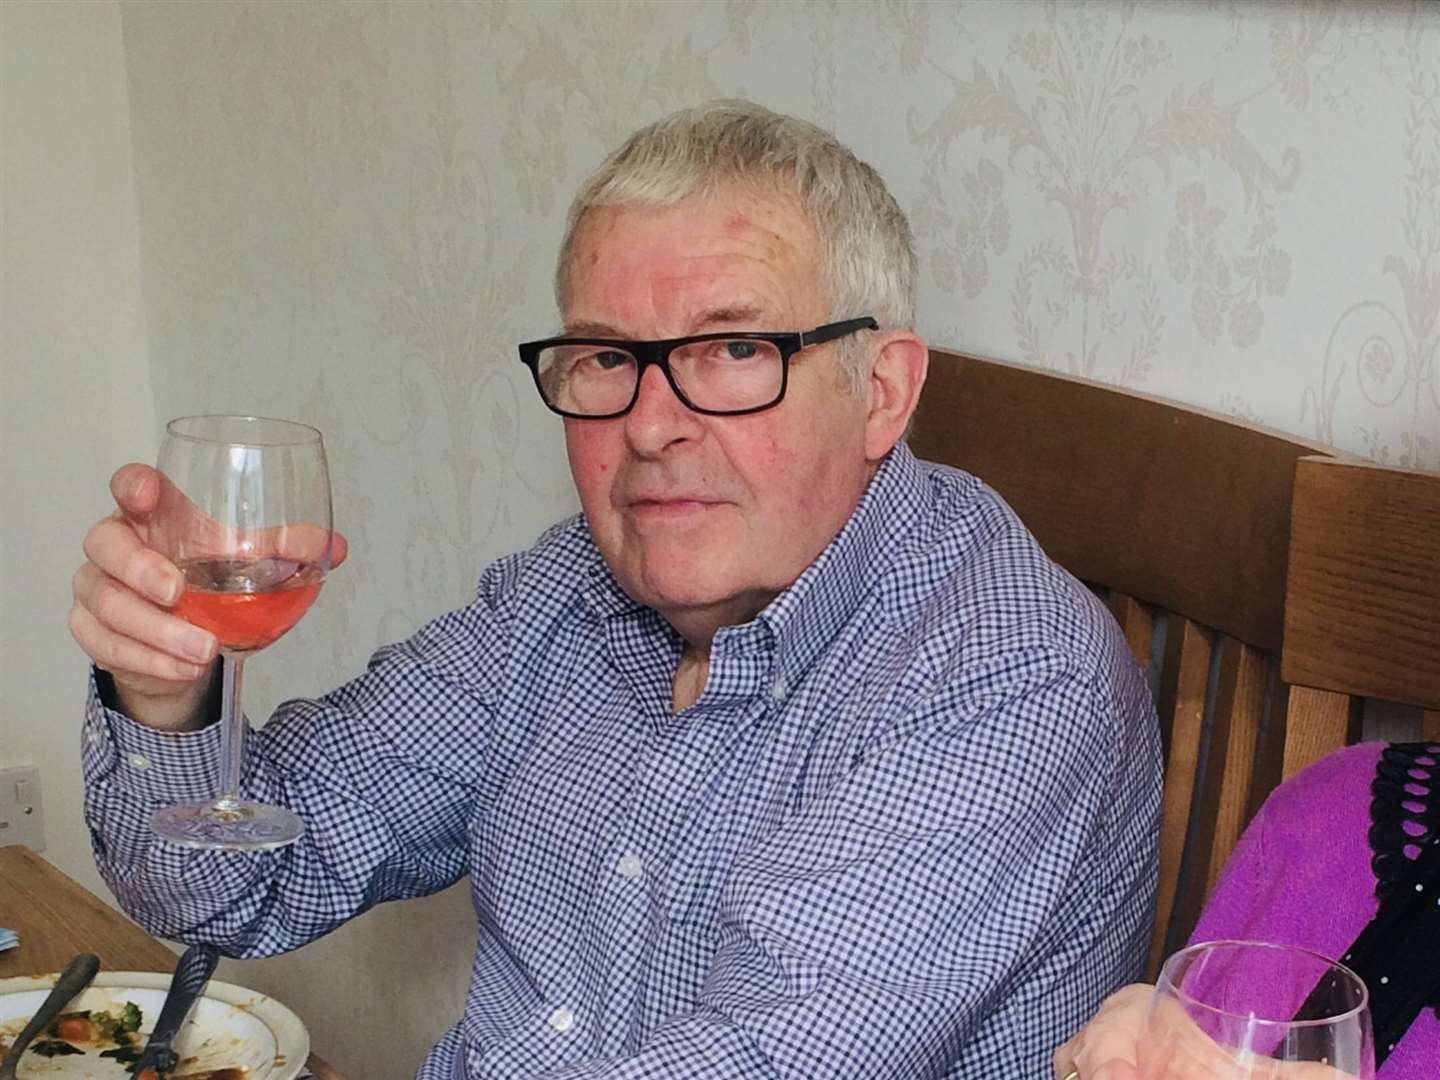 Robert Purser, 80, died after contracting Covid-19 at Medway Maritime Hospital. Picture: Amanda Baker